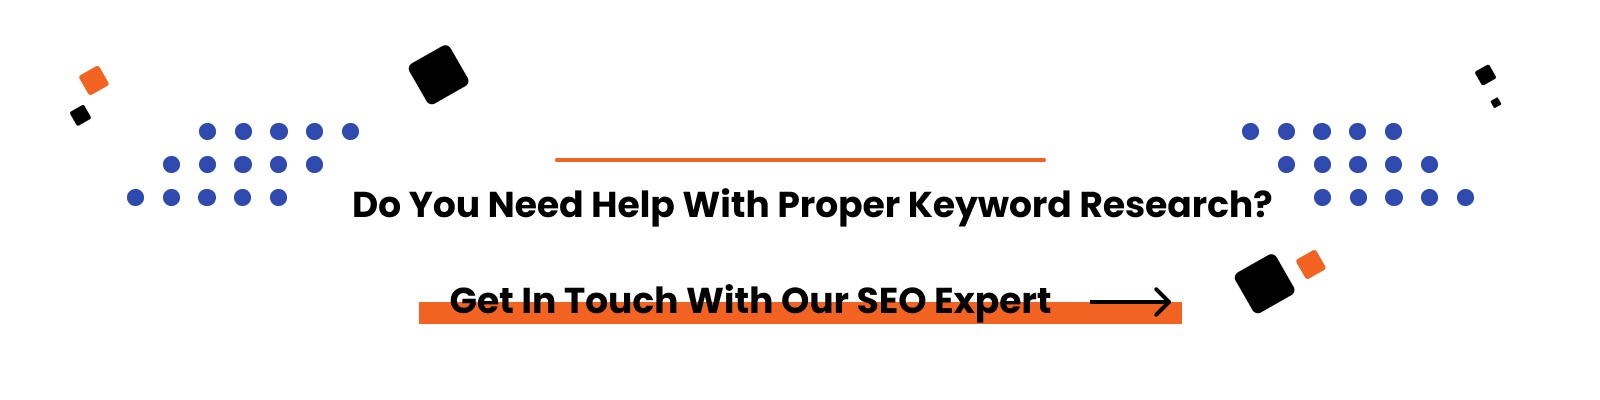 Get In Touch With Our SEO Expert - Magento SEO services